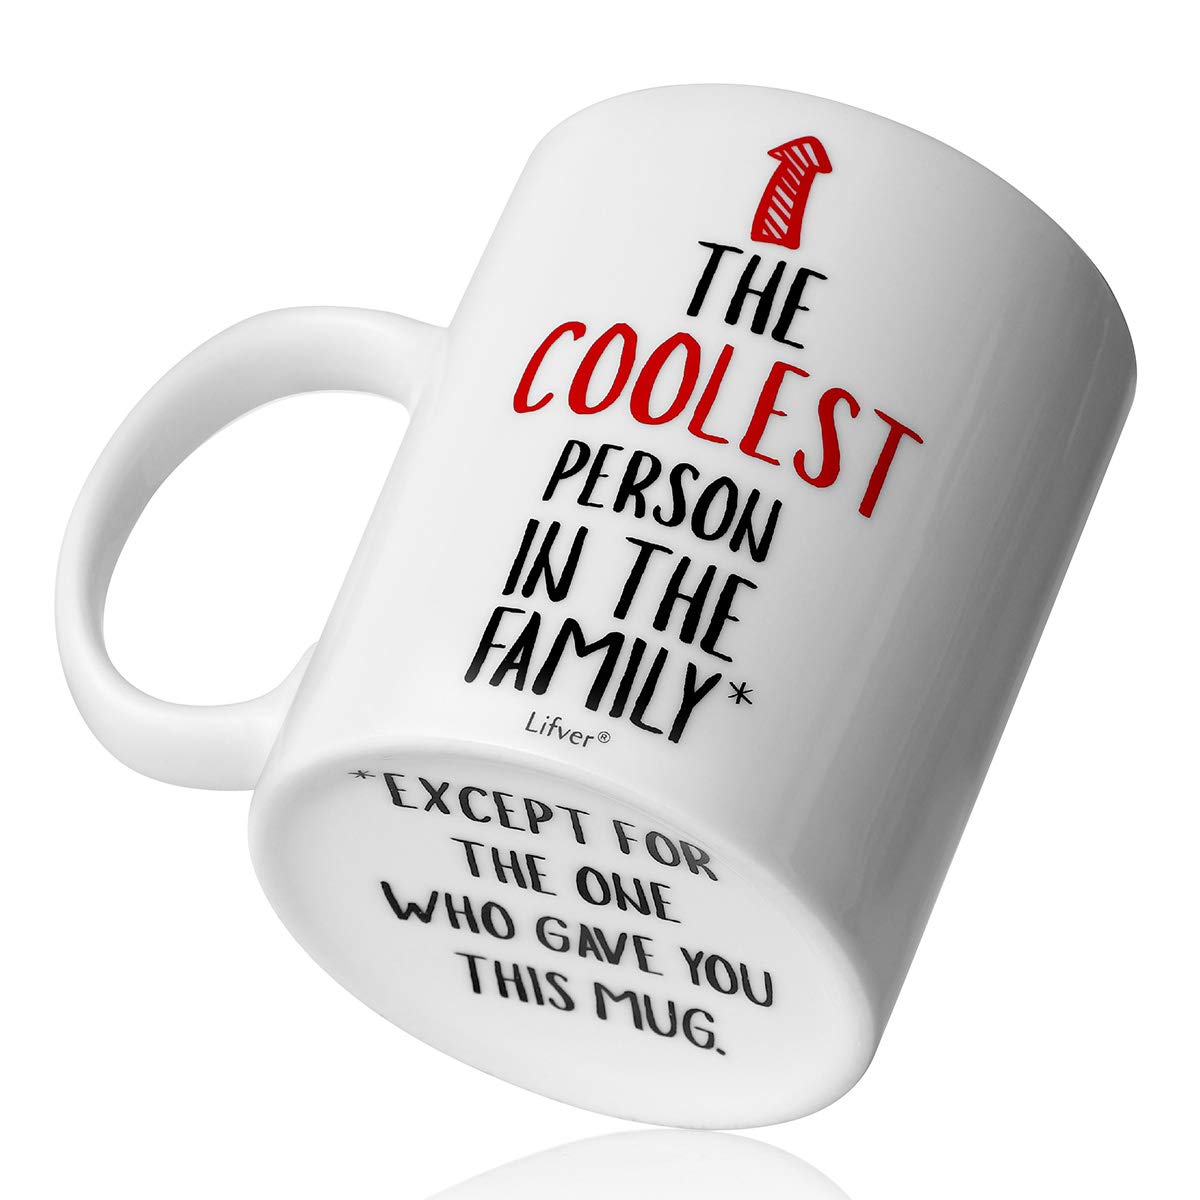 17 Ounces Coffee Cup with Funny Sayings